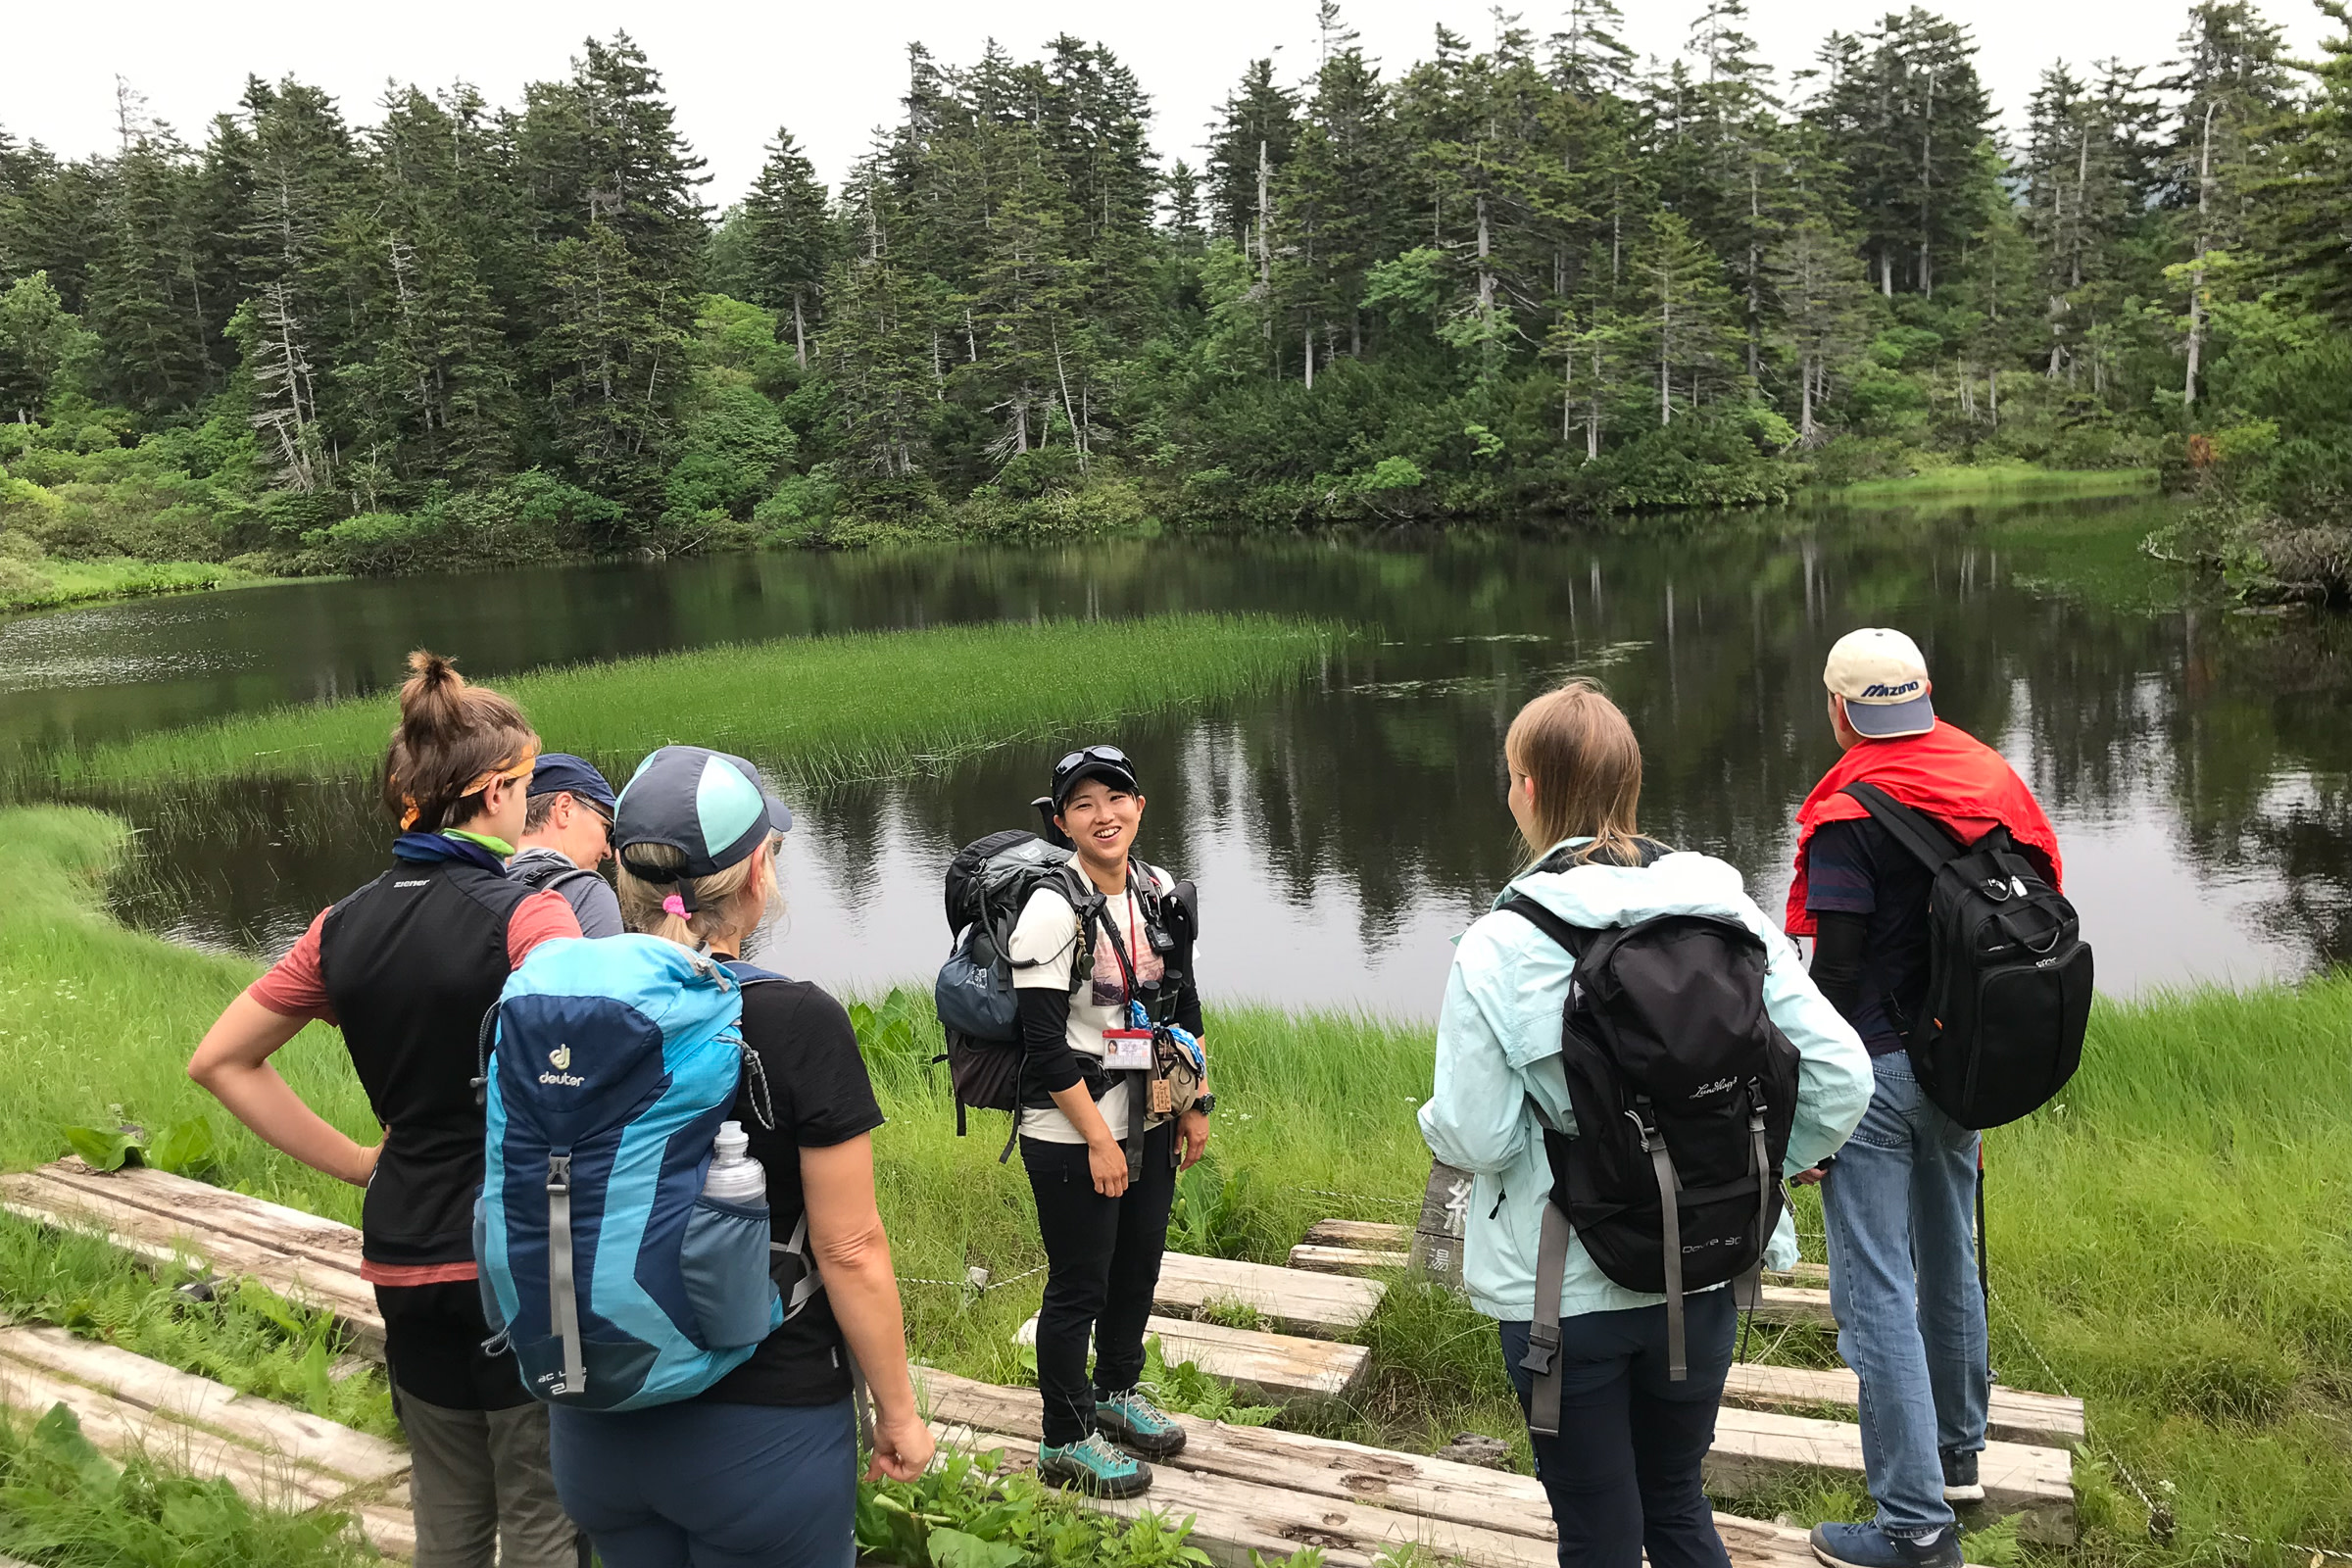 Adventure Hokkaido guide Yuka smiles as she is surrounded by our guests in front of Midori Pond at Daisetsu Kogen.